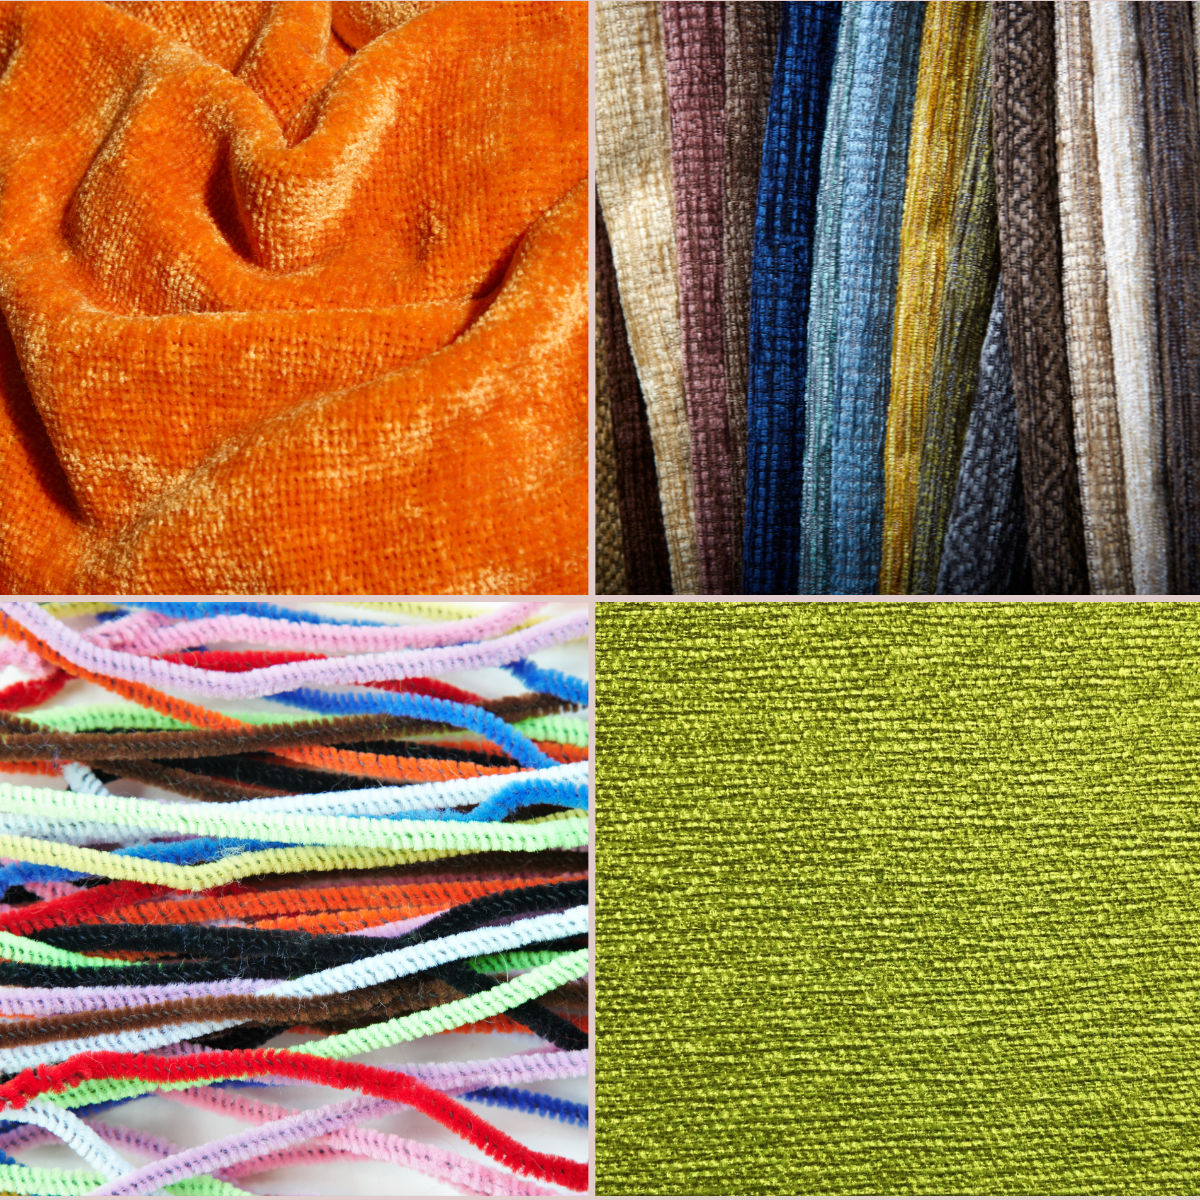 Chenille – What is it & Uses